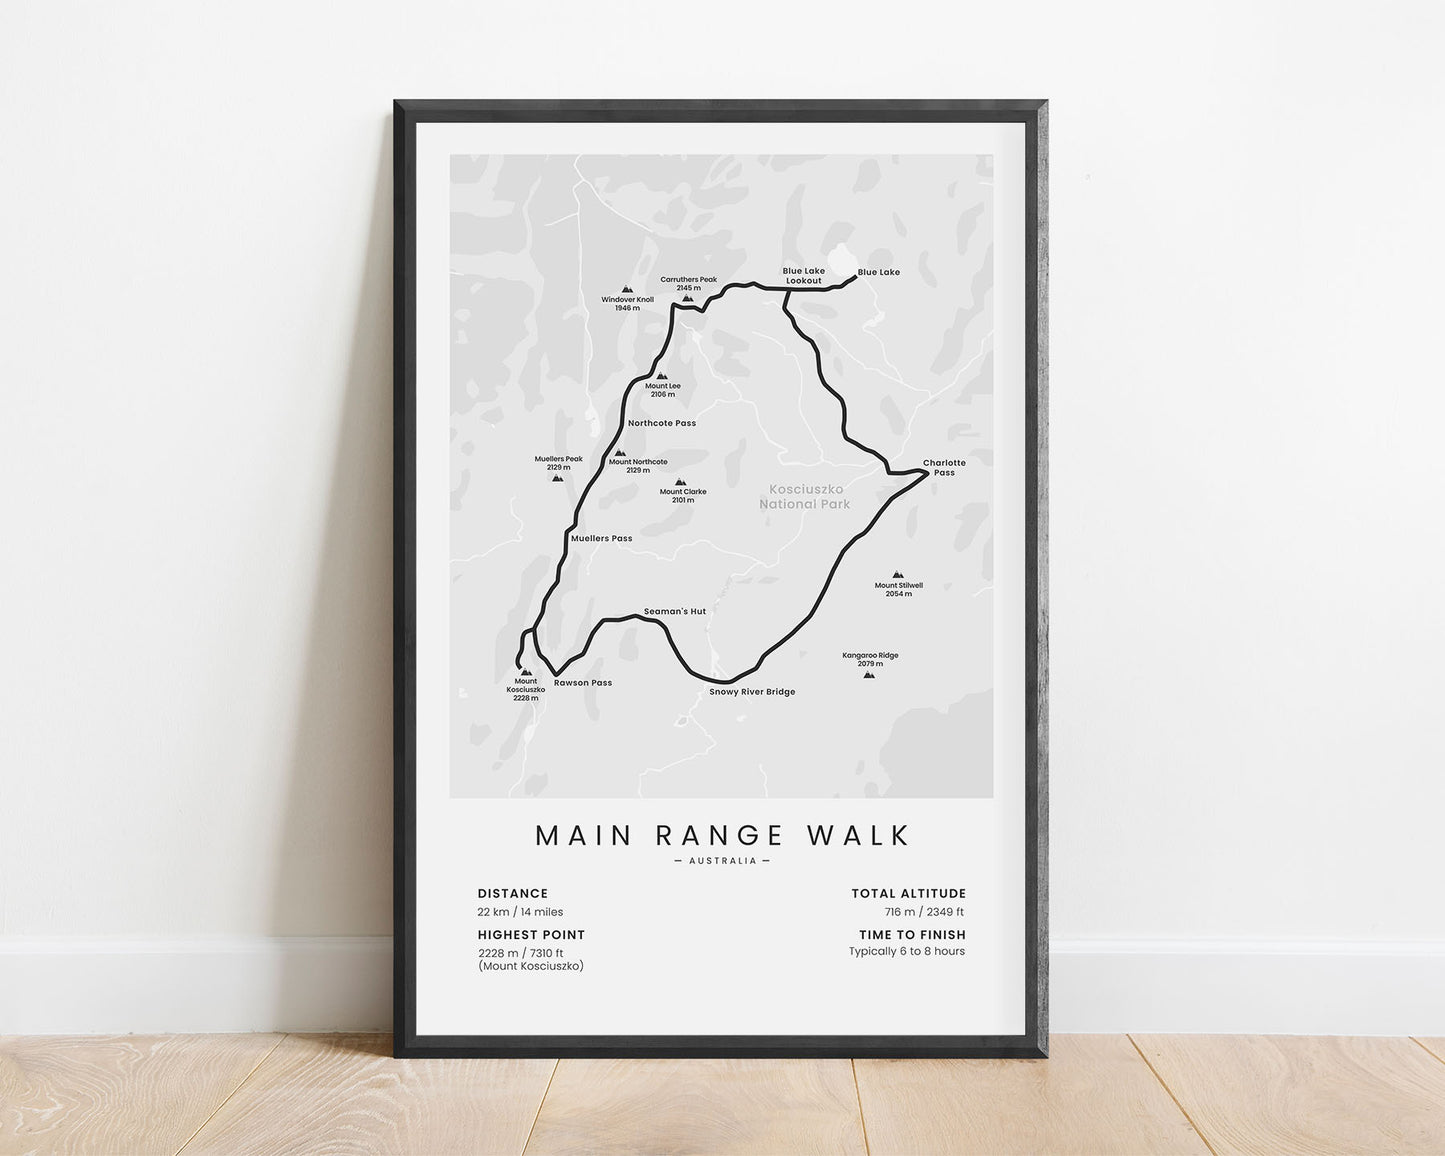 Main Range Walk (Snowy Mountains) Hike Trail Map Art with white background